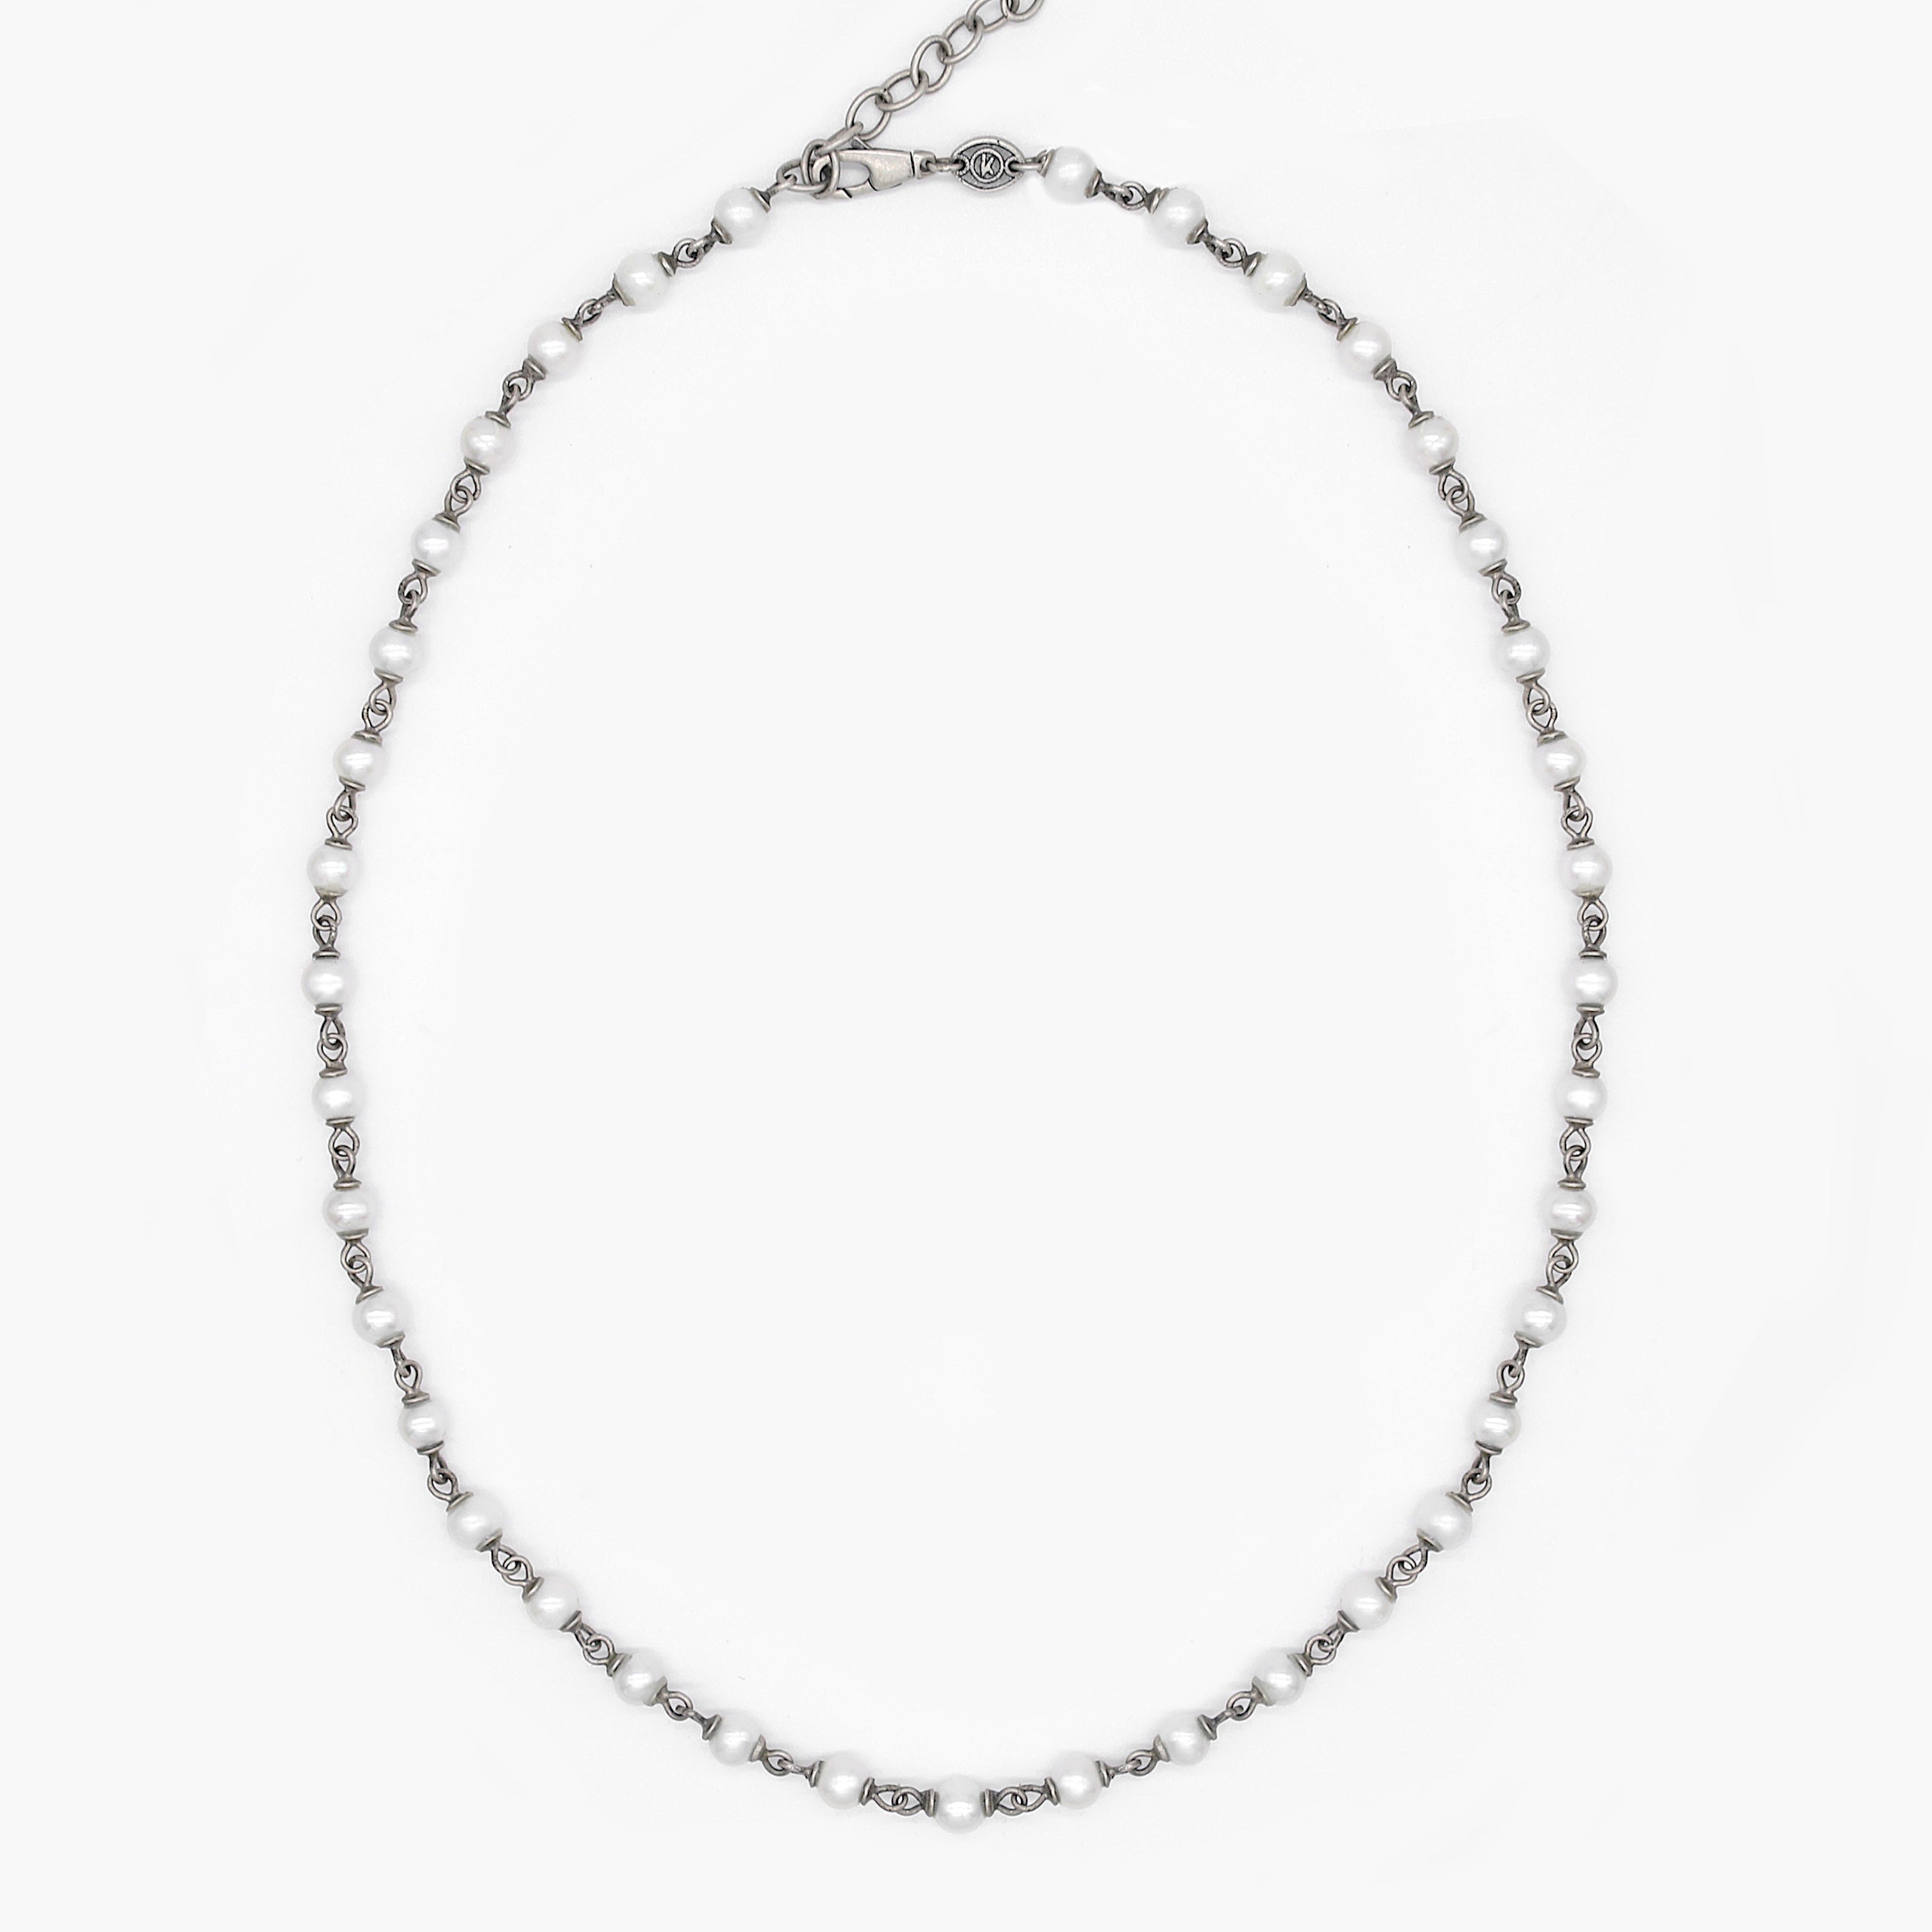 4mm Freshwater Pearls Necklace With Sterling Silver Links-Necklace-Kompsós